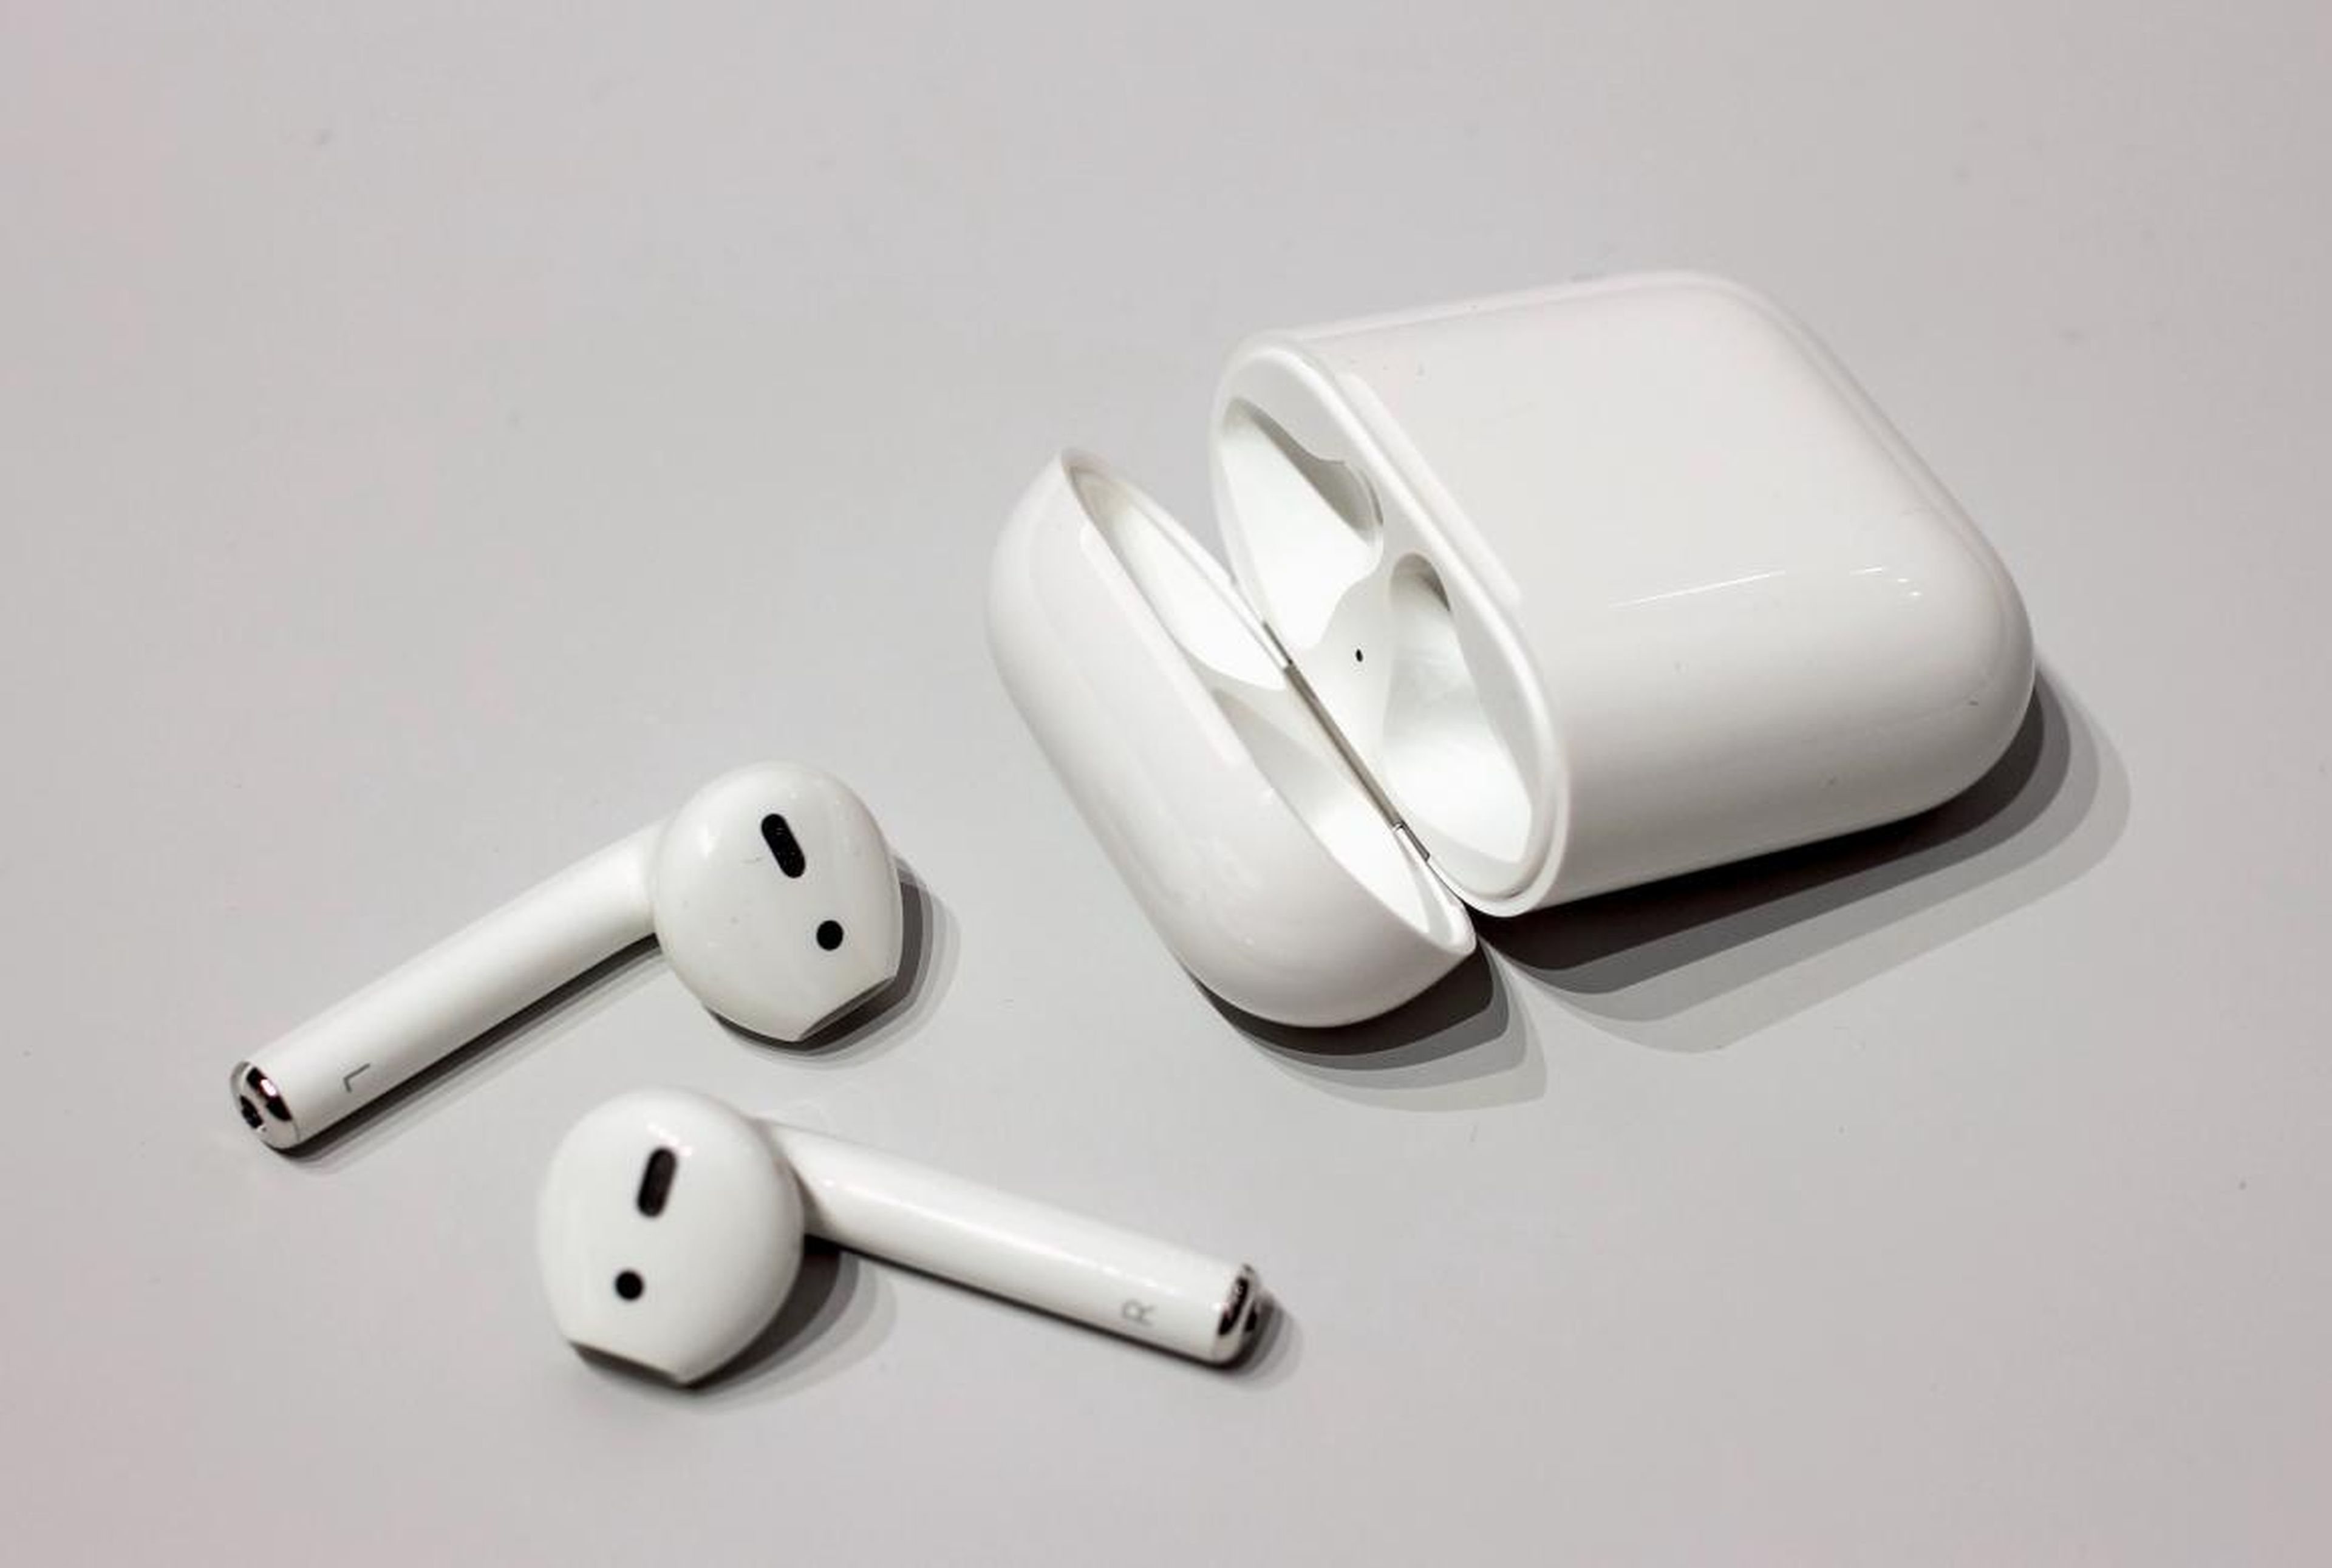 You can wirelessly charge your AirPods without buying the new ones — you just need Apple's new $79 case